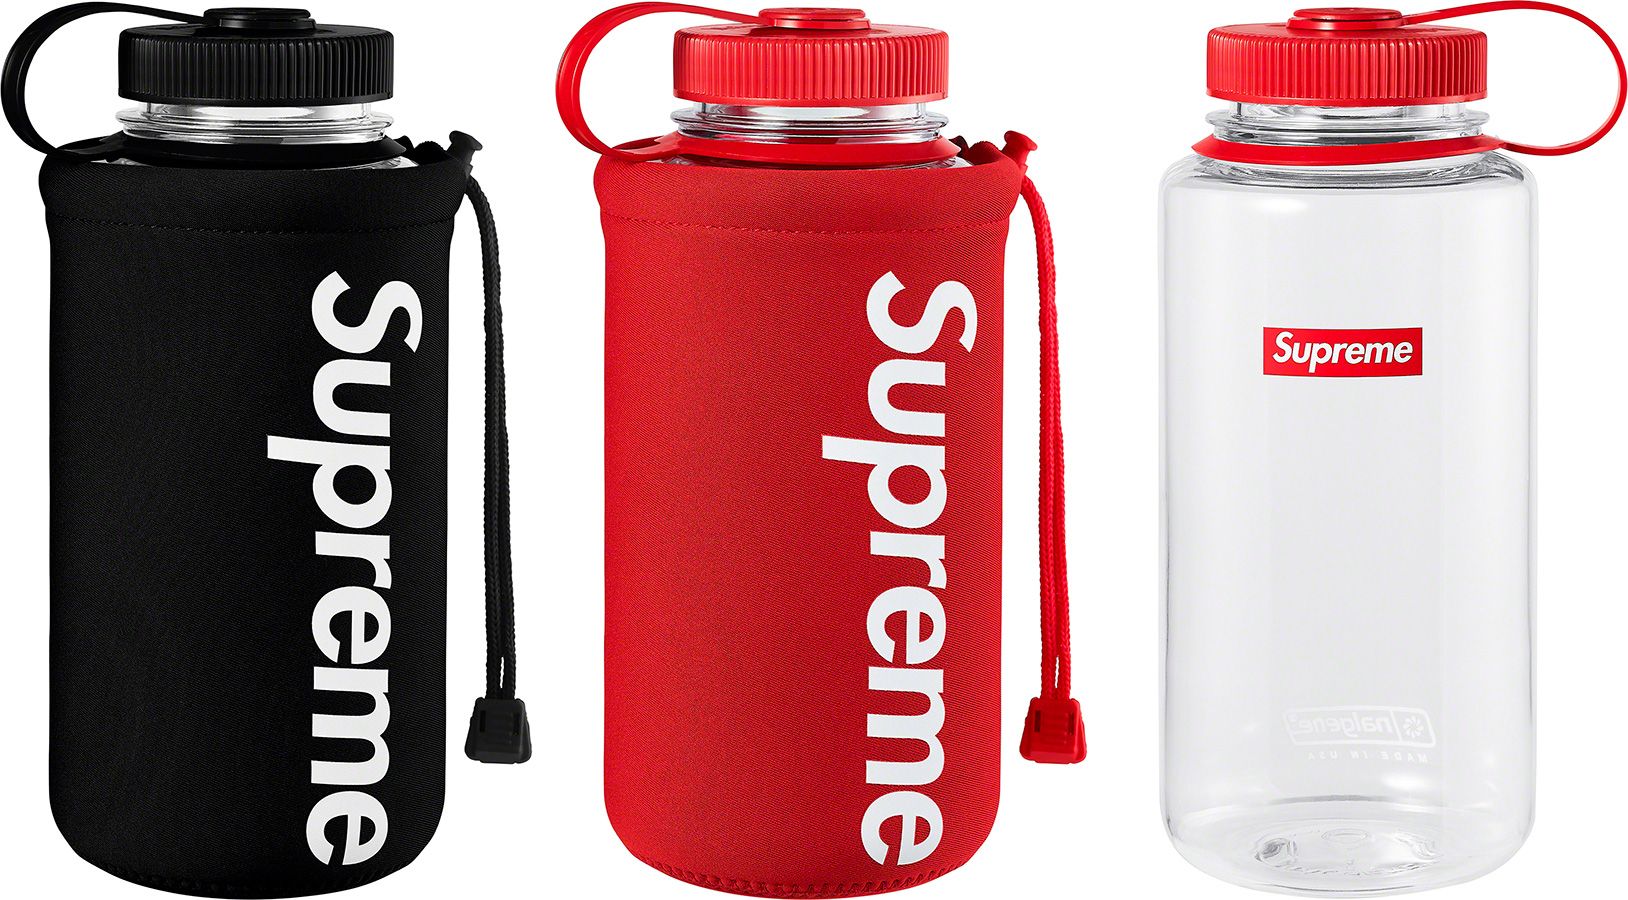 Supreme®/Ziploc® Bags (Box of 30) - Spring/Summer 2020 Preview 